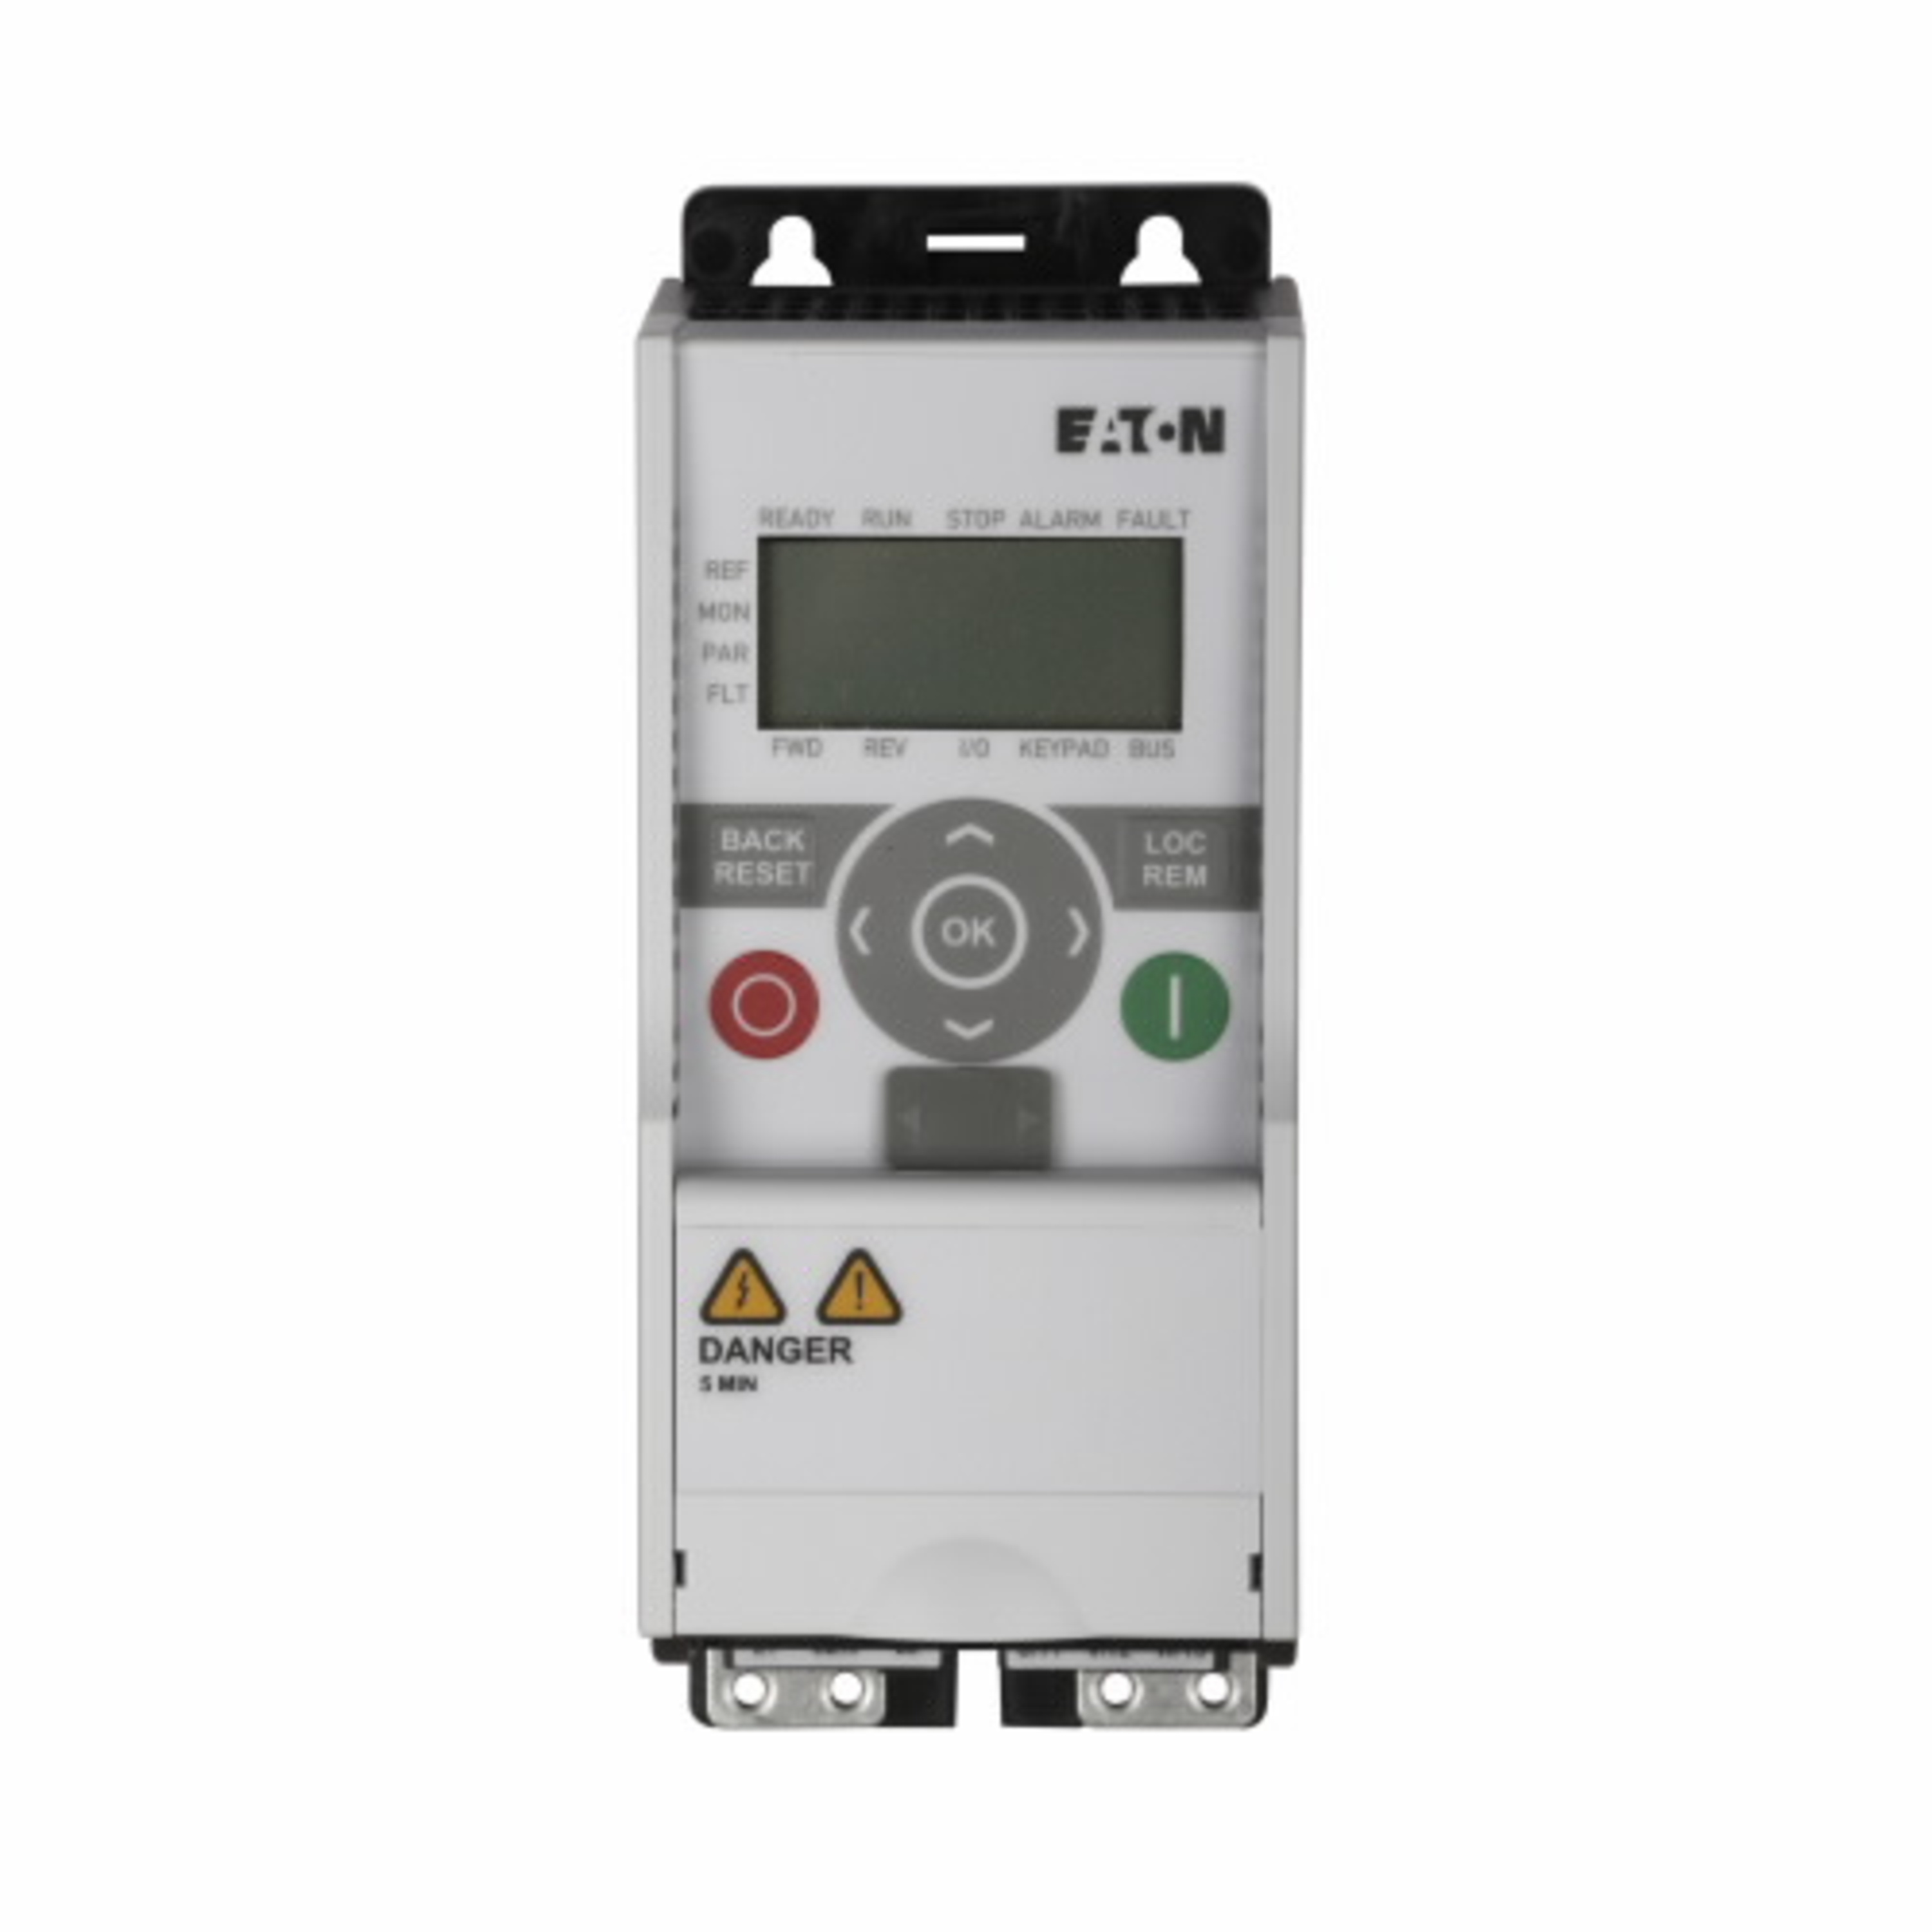 Eaton MMX12AA4D8N0-0 Eaton | Cutler Hammer MMX12AA4D8N0-0  Variable Frequency Drives AC Drives – 240VAC – 1 Phase https://gesrepair.com/wp-content/uploads/2022/Eaton/Images/Eaton_MMX12AA4D8N0-0_Variable_Frequency_Drive.jpg